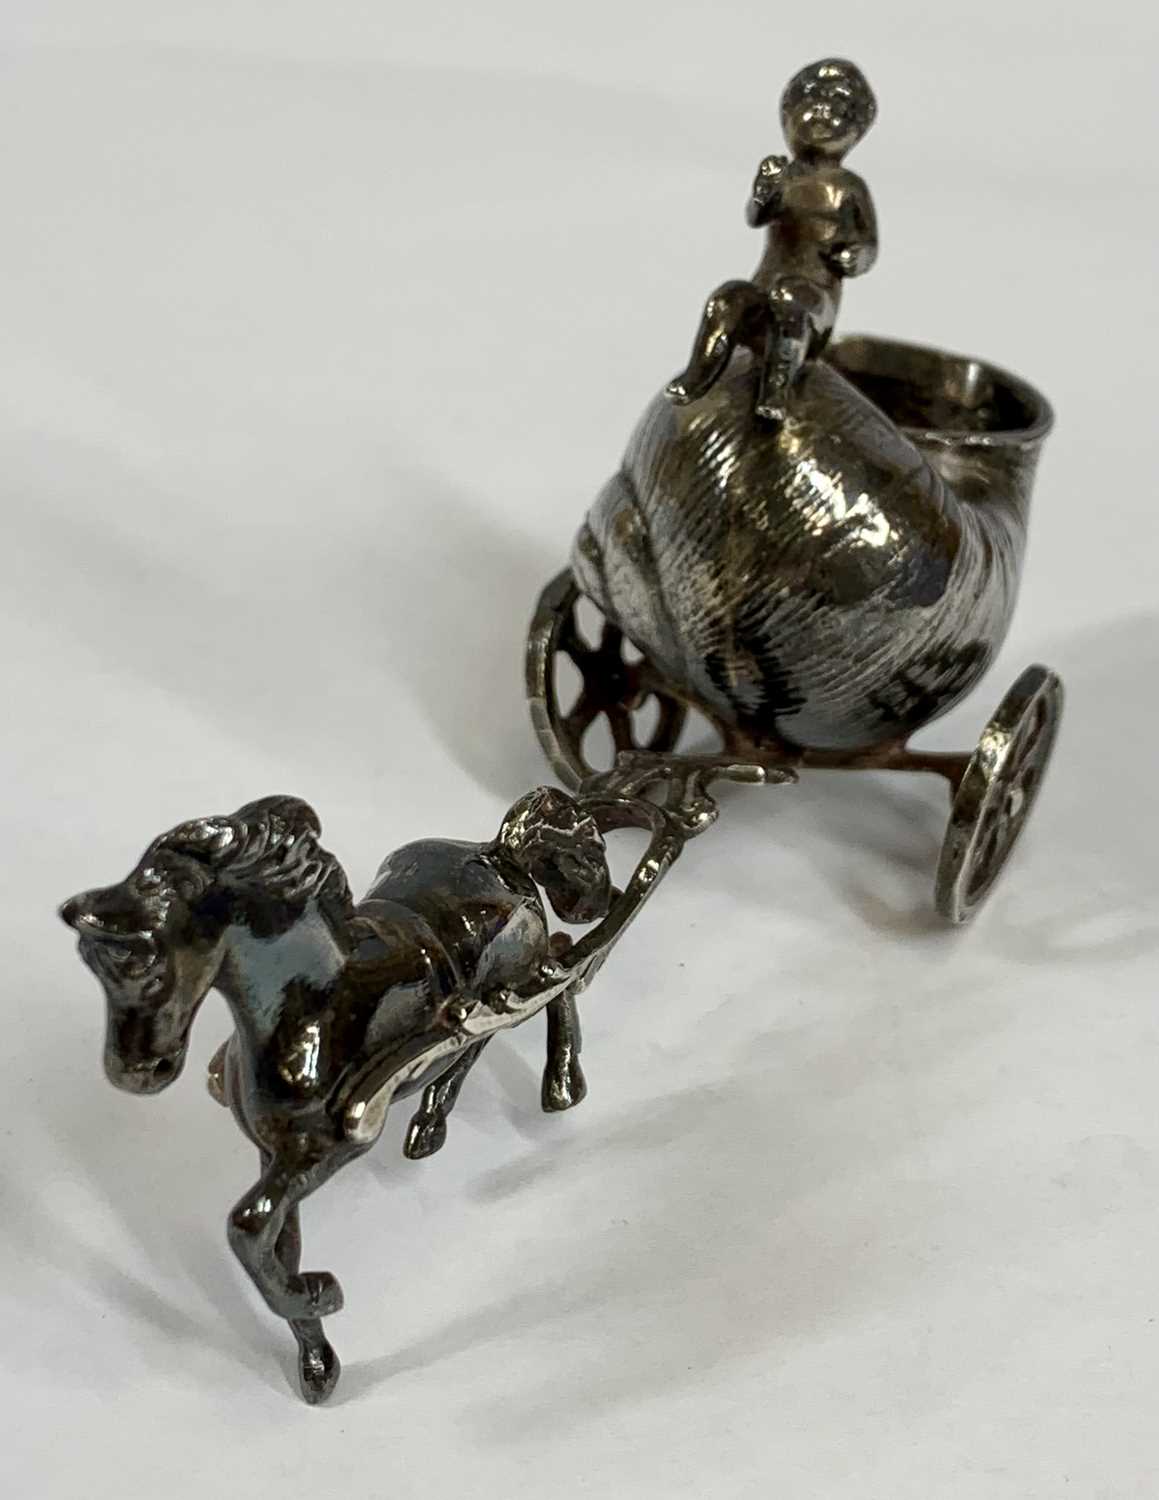 NOVELTY CONTINENTAL CAST SILVER SALT, modelled as cherub riding a snail shell chariot pulled by - Image 2 of 3